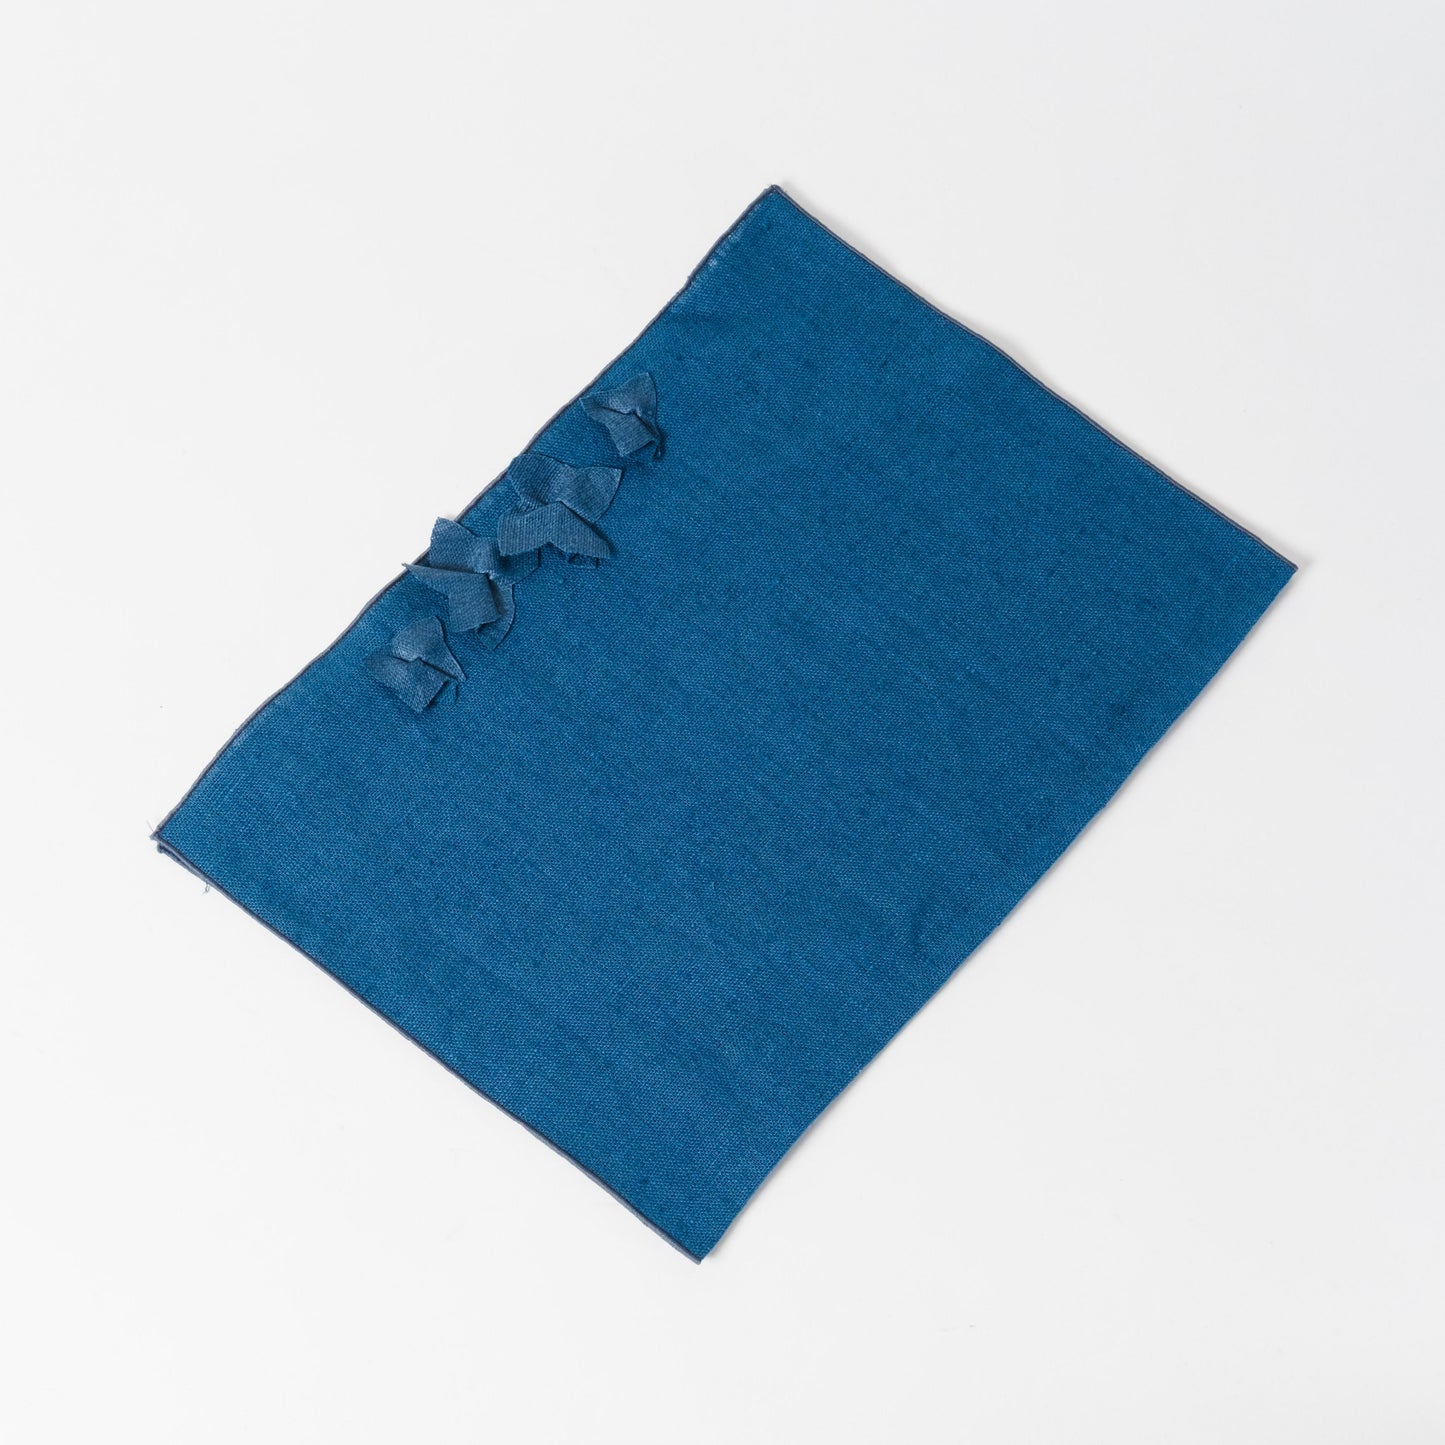 Rectangular Placemat - Blue Common Things